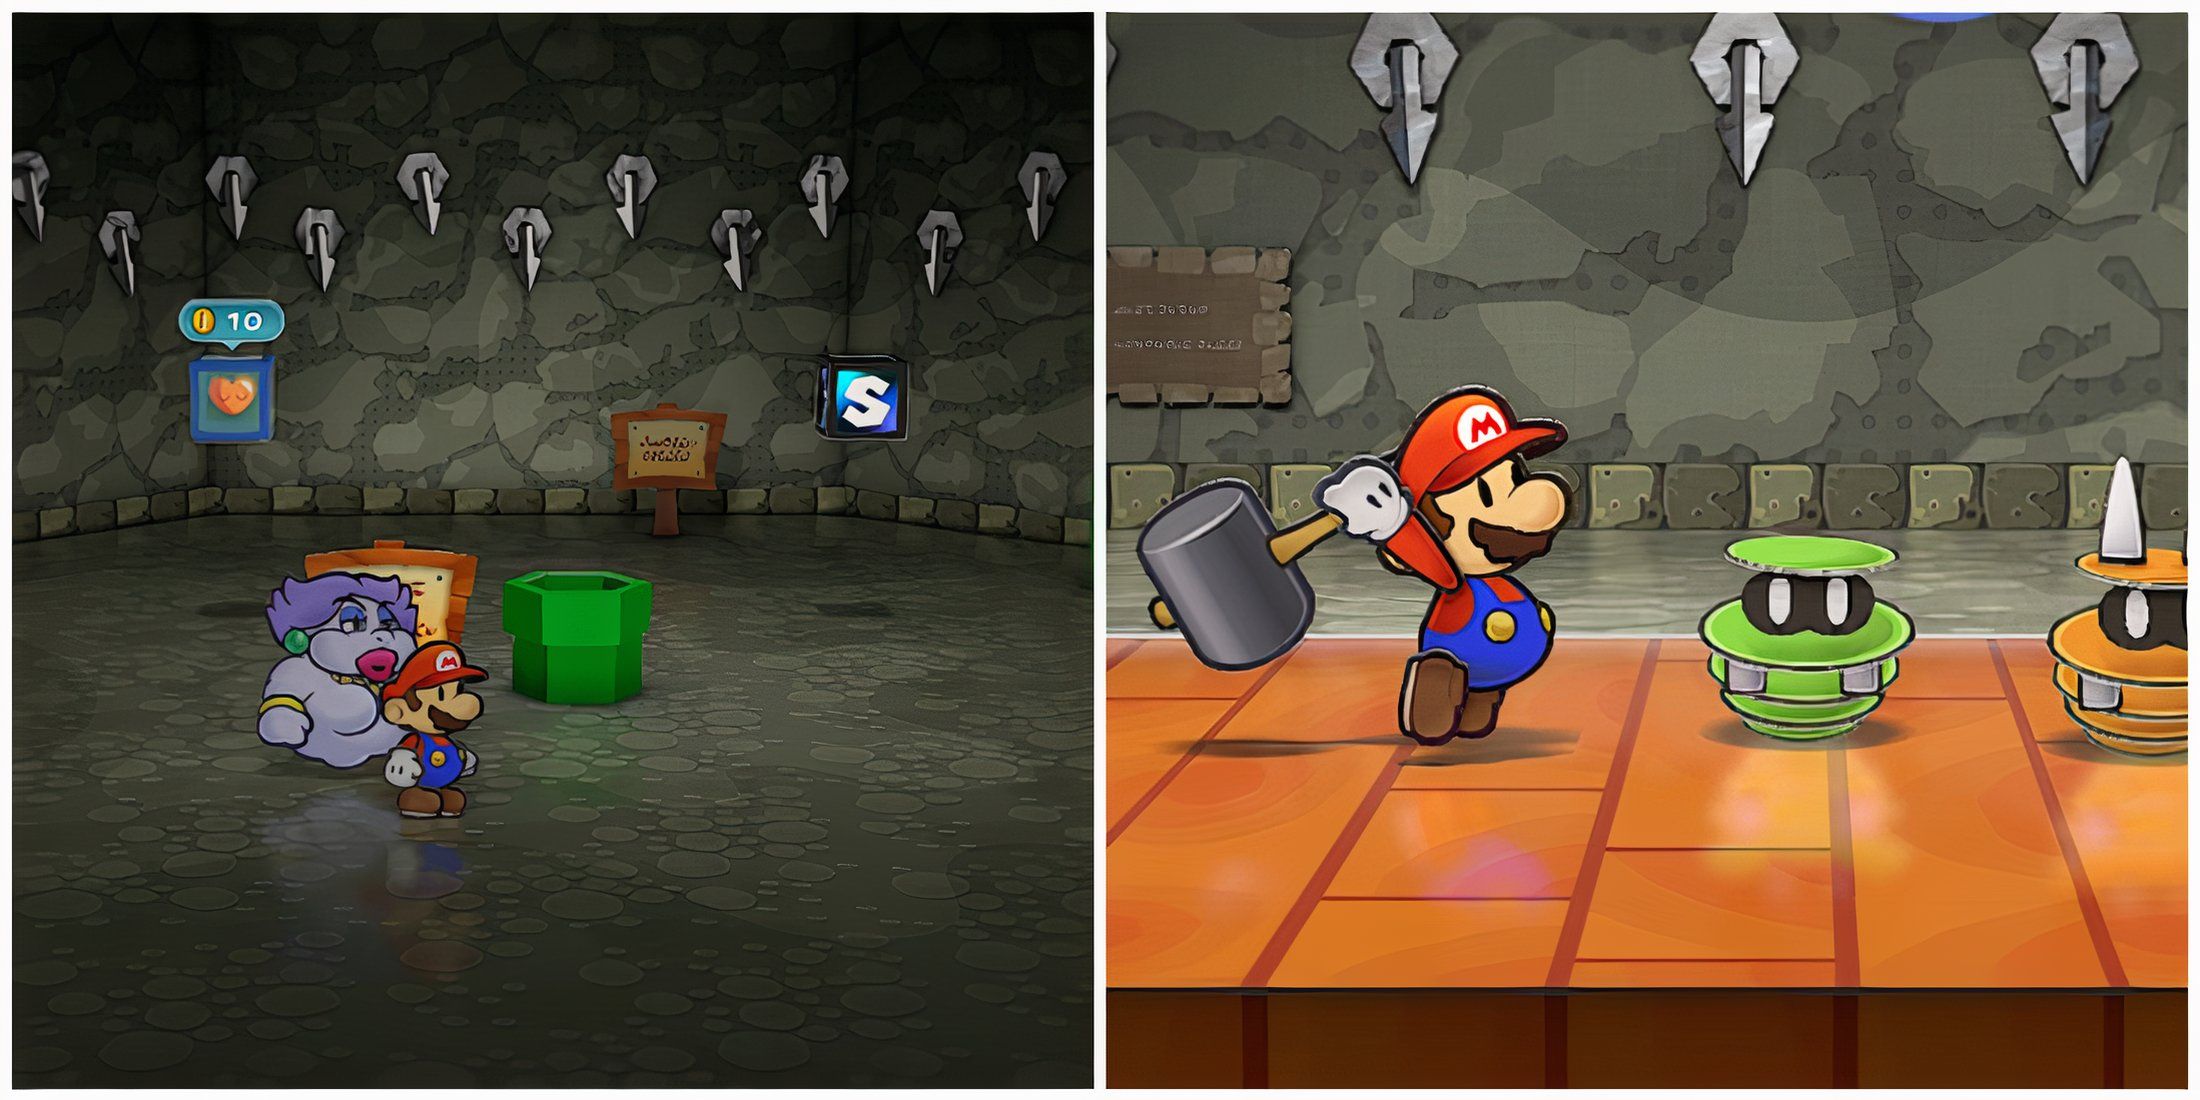 Split image of Mario and Madame Flurrie at the Pit of 100 Trials entrance and Mario in battle with Spinia and Spania in Paper Mario The Thousand Year Door